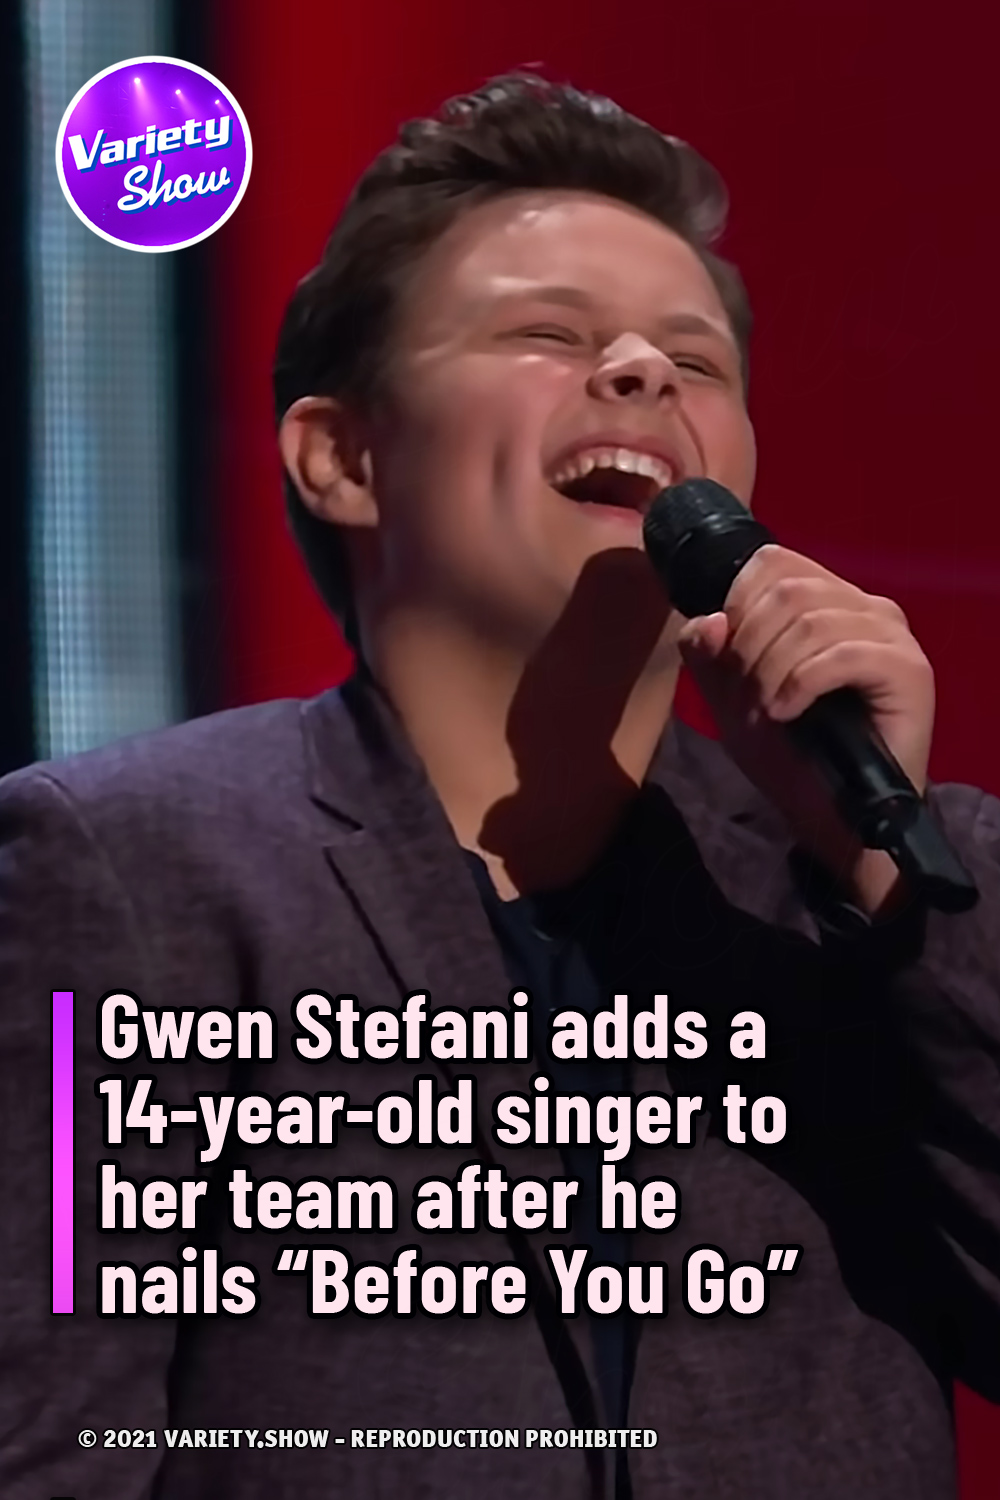 Gwen Stefani adds a 14-year-old singer to her team after he nails “Before You Go”